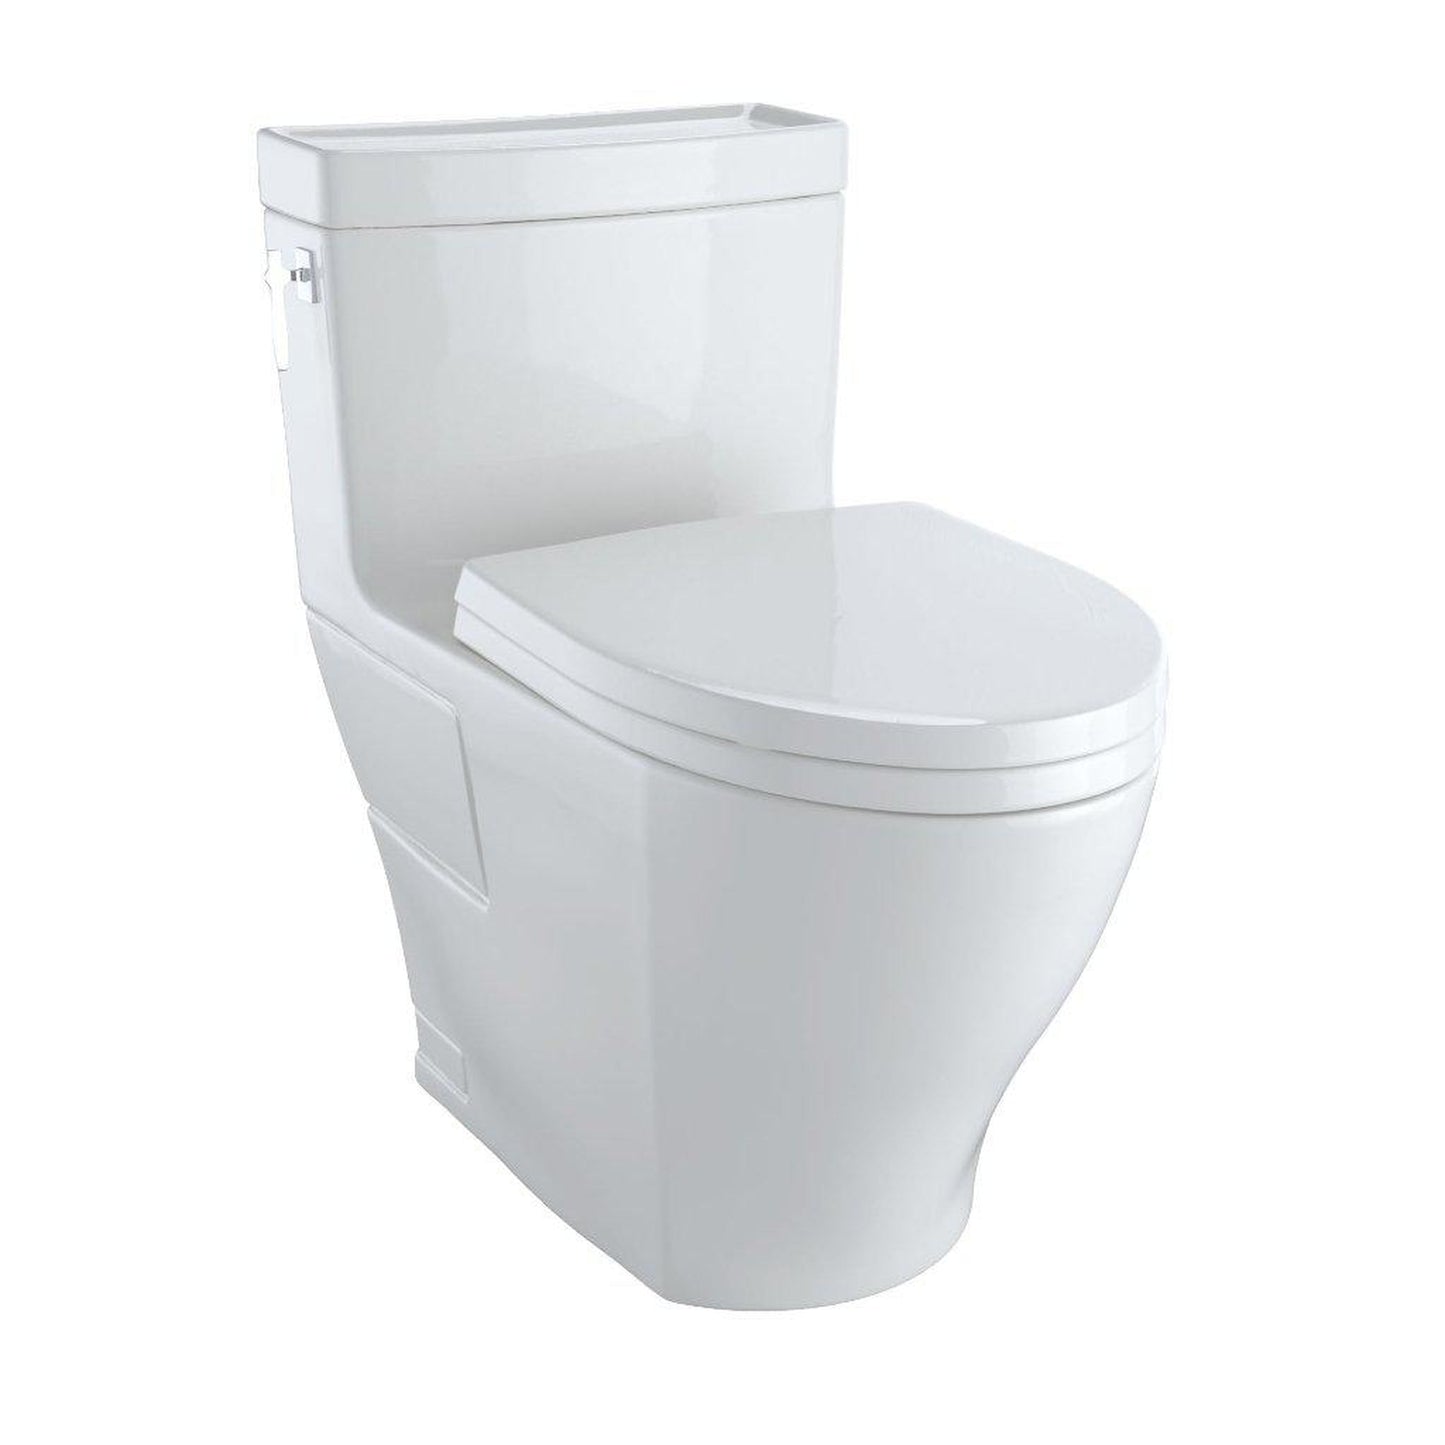 TOTO Aimes Colonial White 1.28 GPF Elongated One-Piece Toilet With Washlet+ Connection